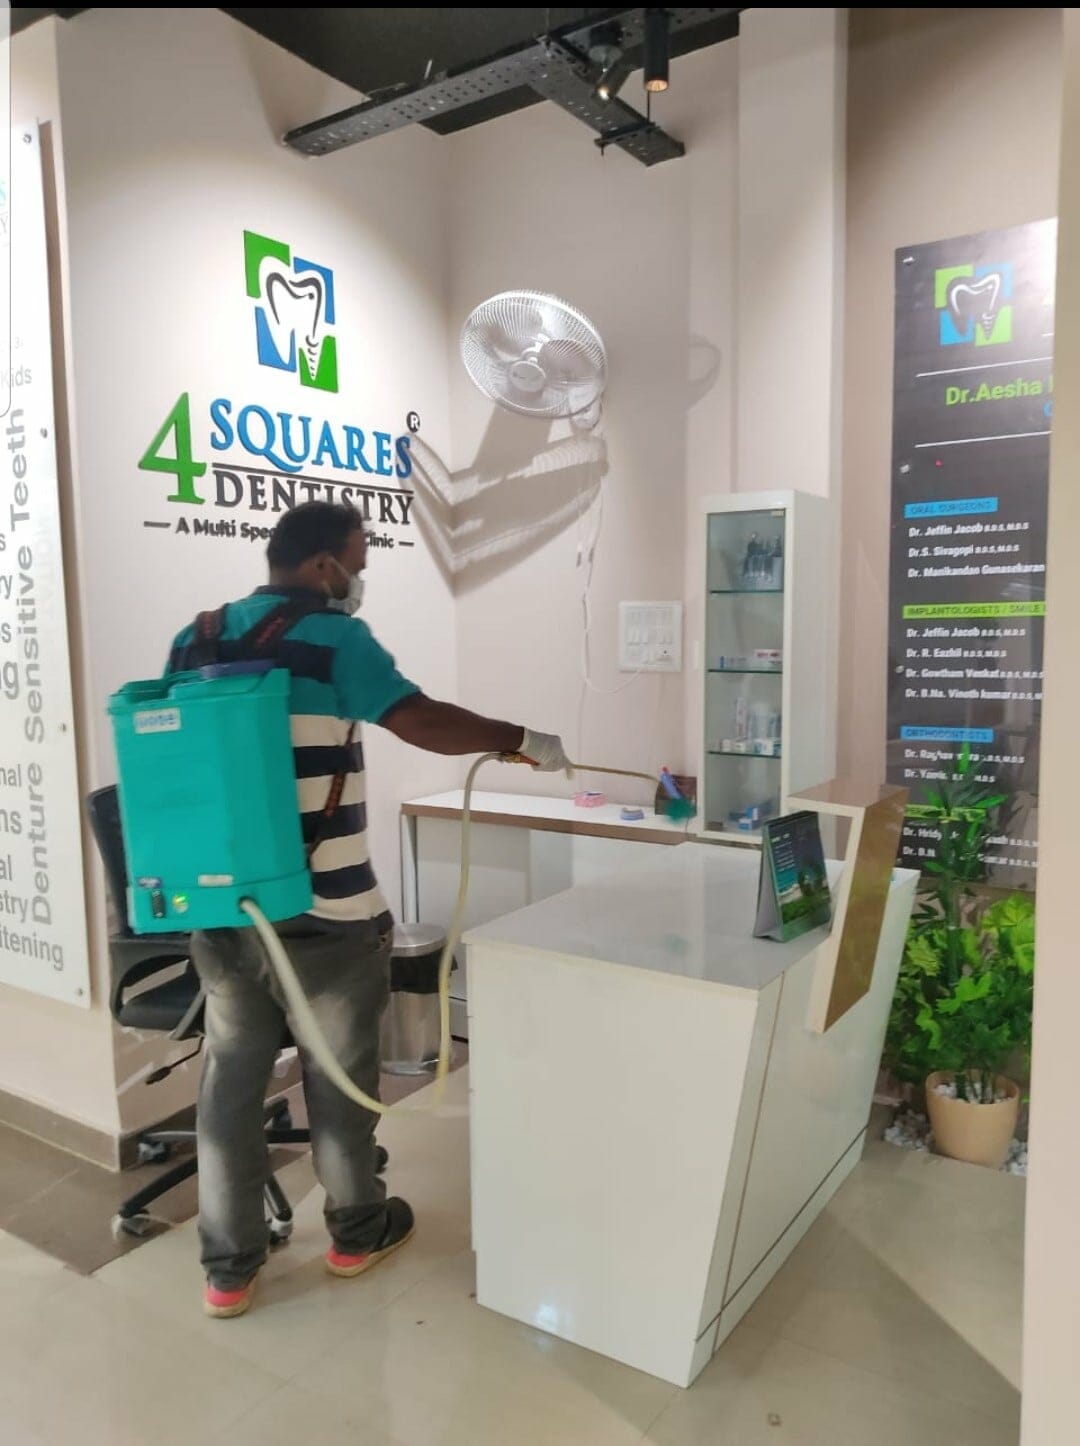 Sanitation worker disinfects the 4 Squares dental clinic's front desk in Gowrivakkam